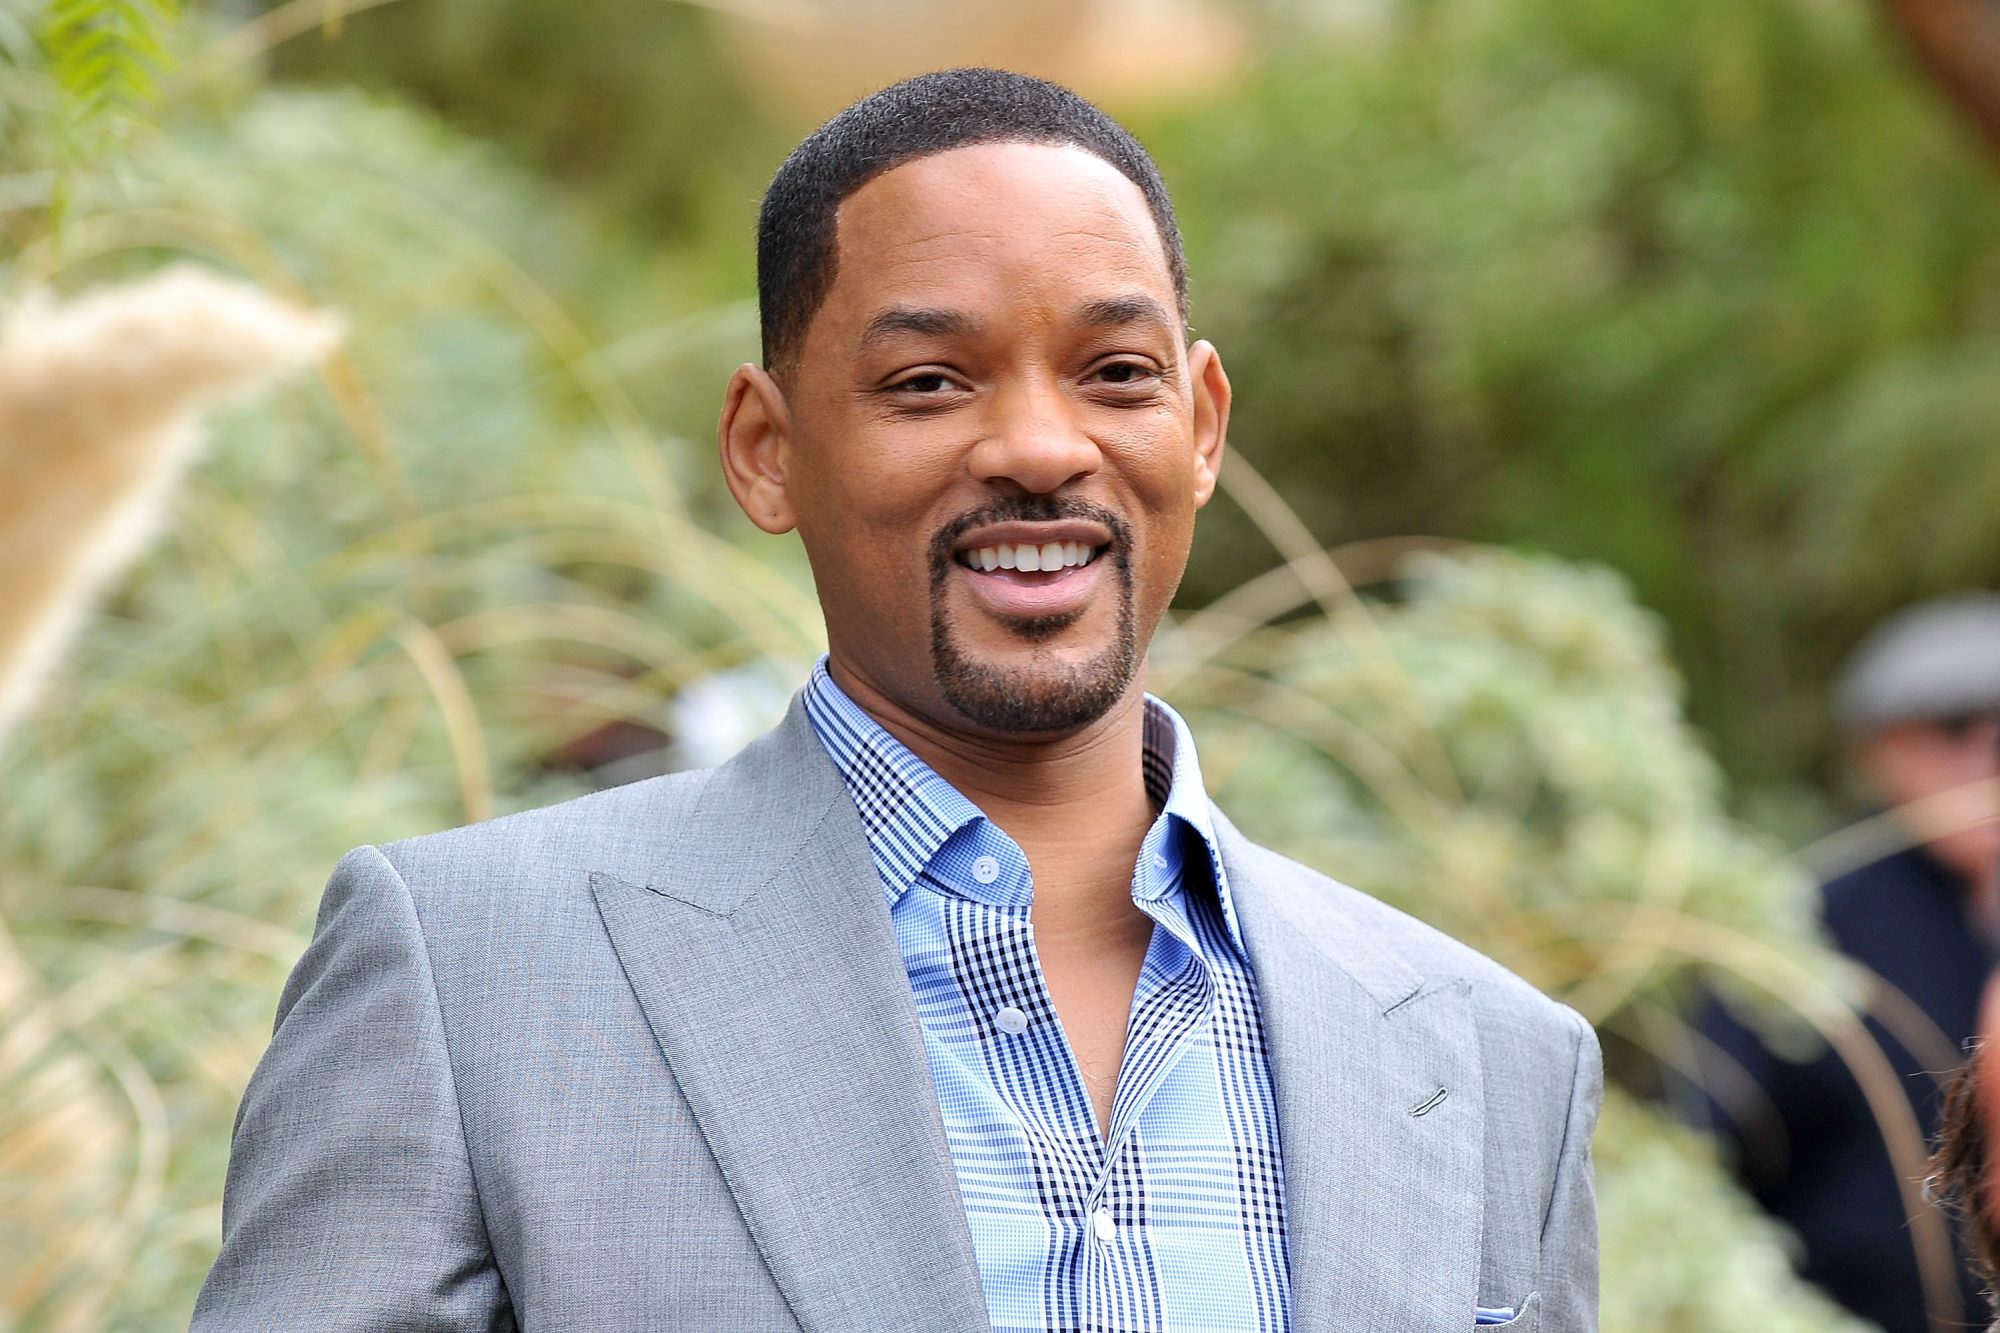 PALM SPRINGS, CA - JANUARY 03: Will Smith attends Variety's Creative Impact Awards and 10 Directors To Watch Brunch at the Parker Palm Springs on January 3, 2016 in Palm Springs, California.  (Photo by Jerod Harris/Getty Images,)